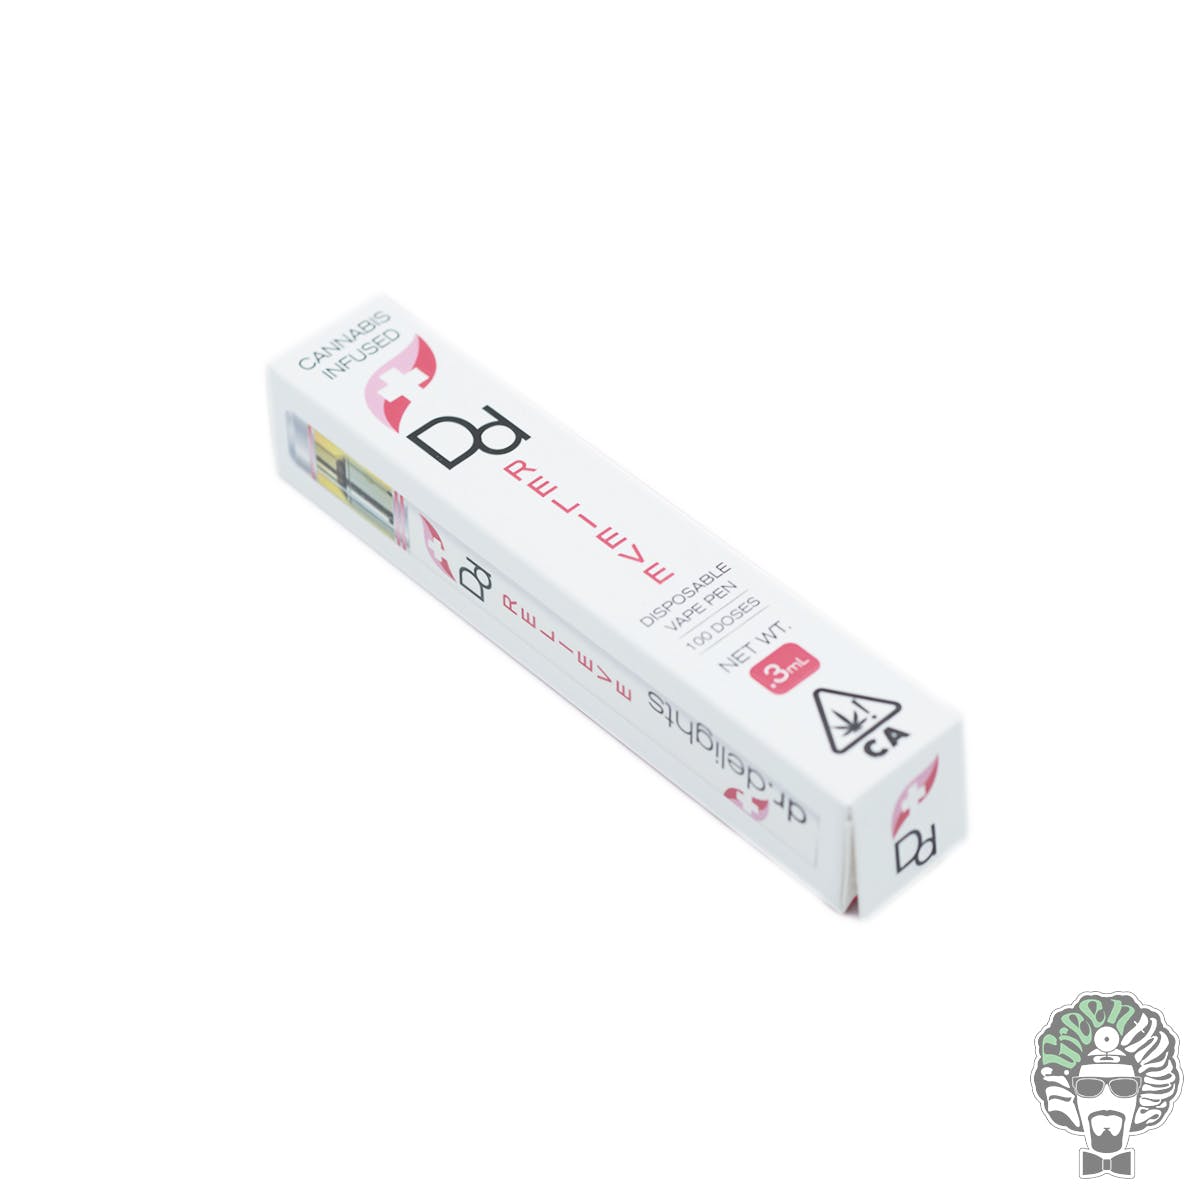 concentrate-thc-relieve-disposable-vape-cartridge-by-dr-delight